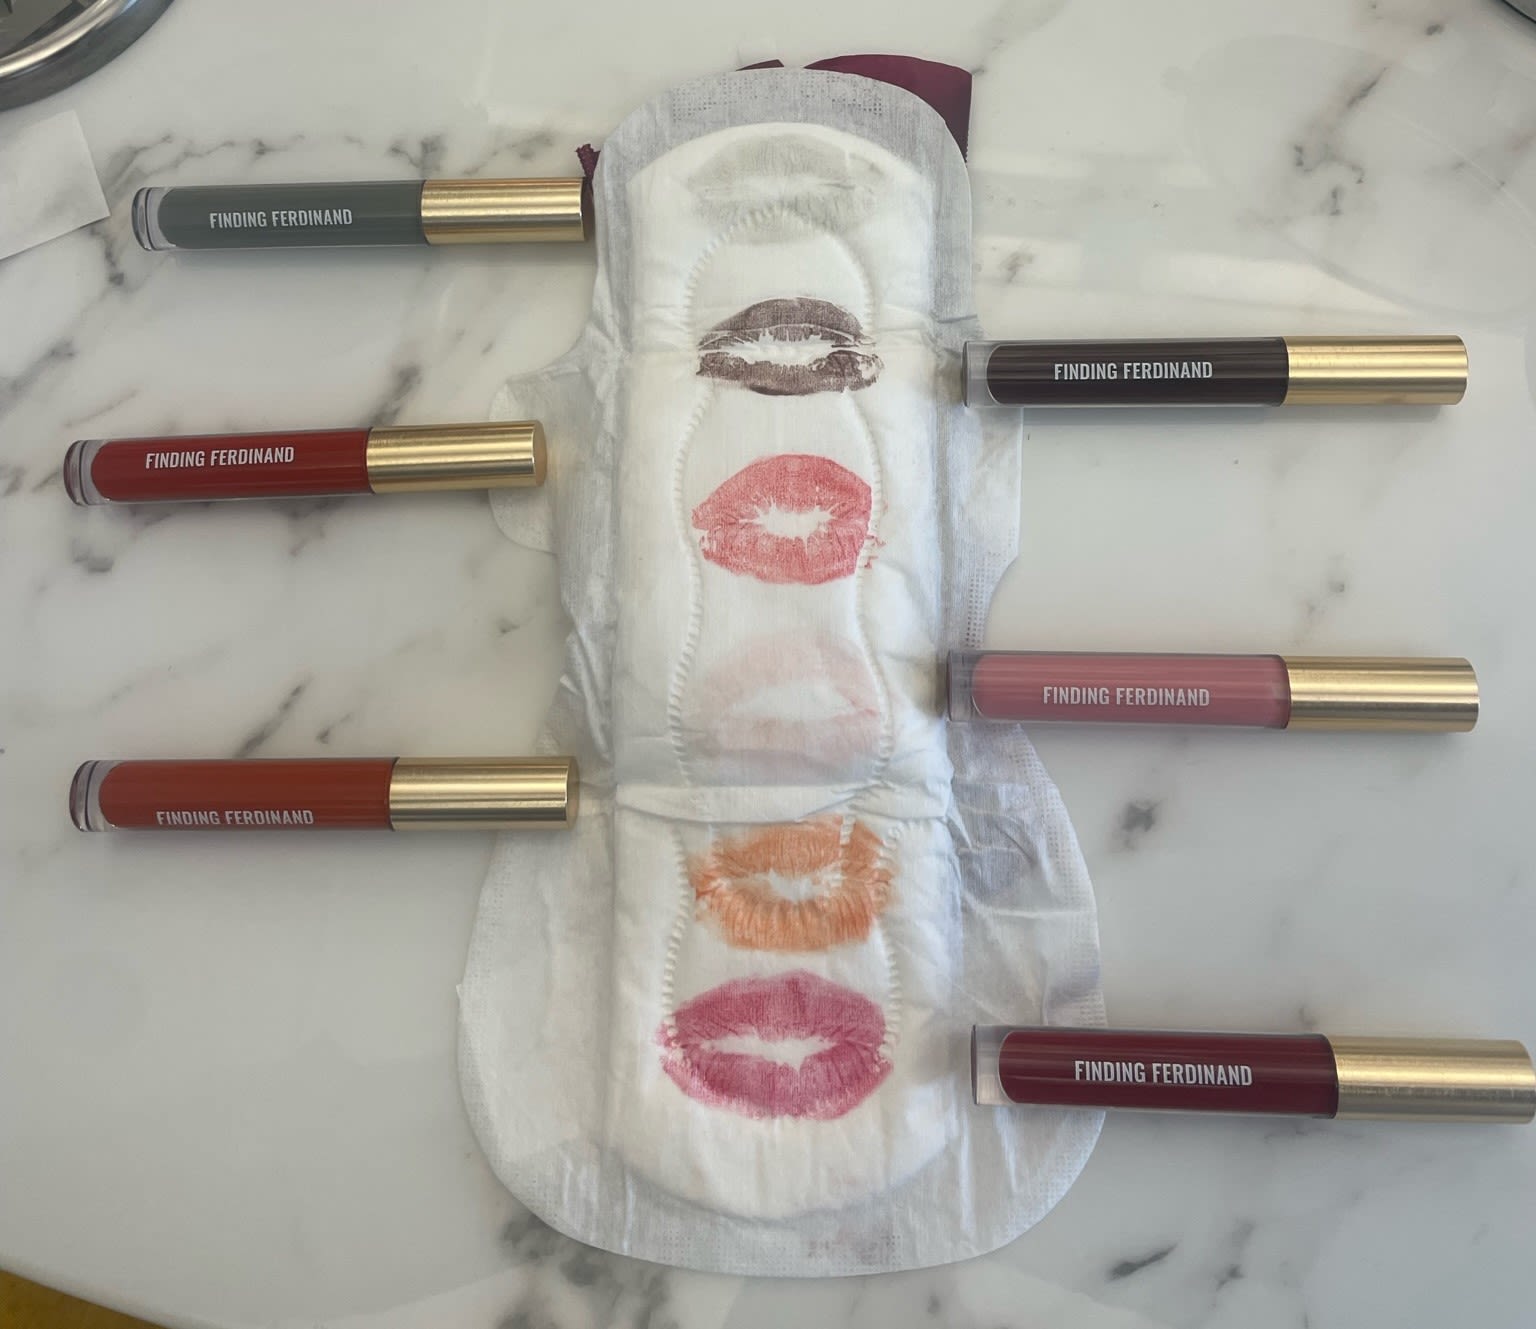 Why we created period-themed lip gloss…